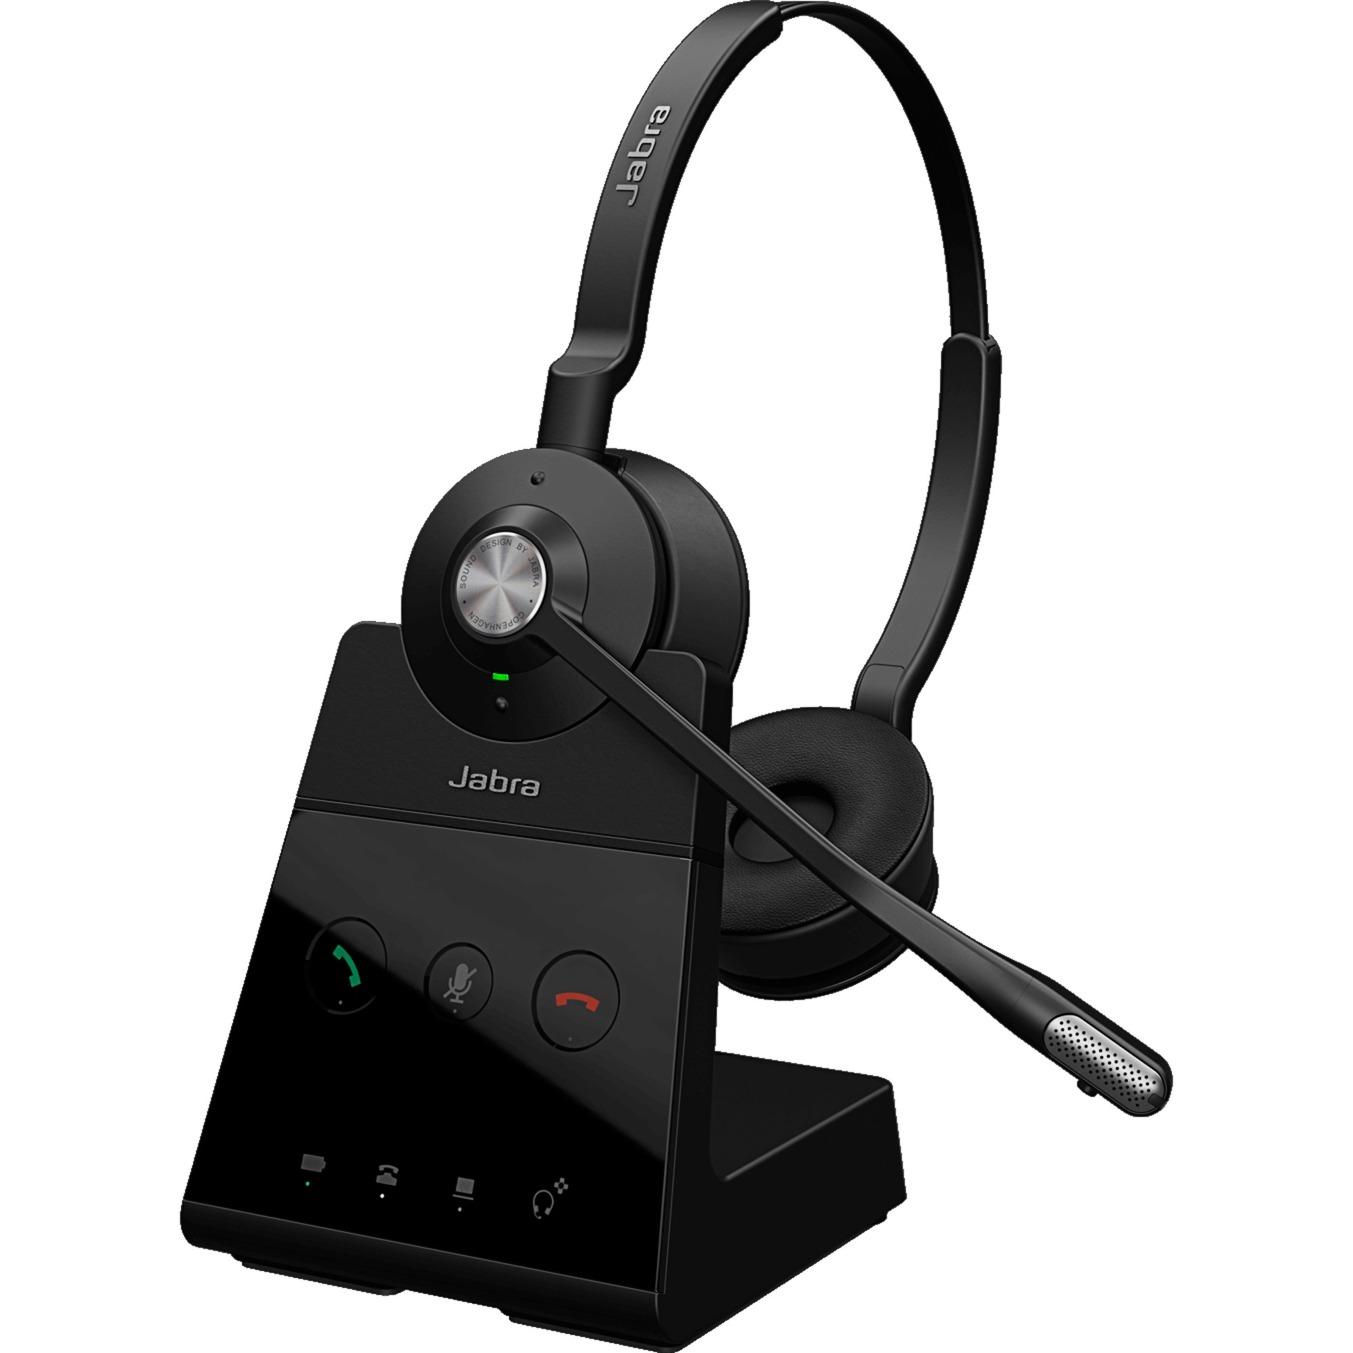 Engage 65 Stereo, Headset